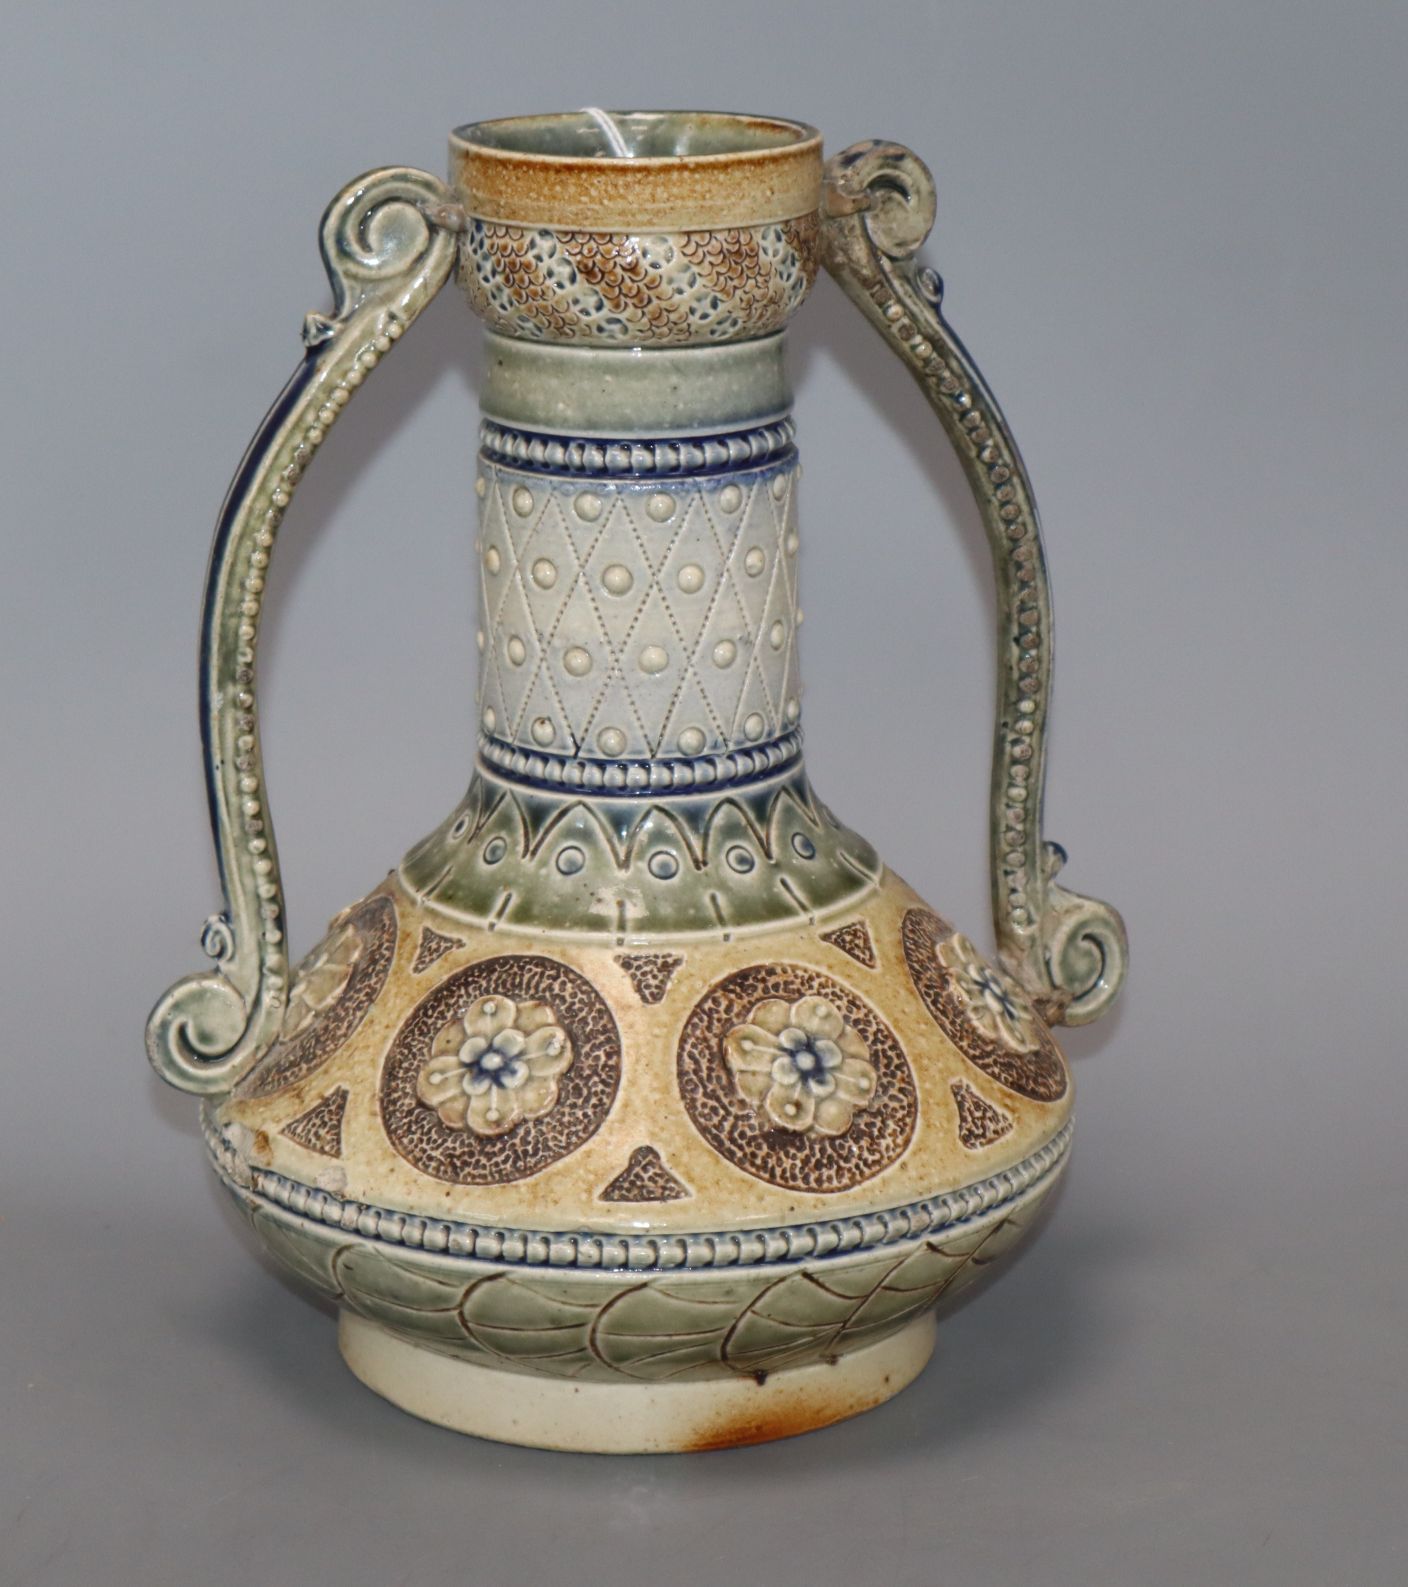 A C J C Bailey Fulham pottery two handled vase by Edgar Kettle, No. 41, 1874 height 22.5cm